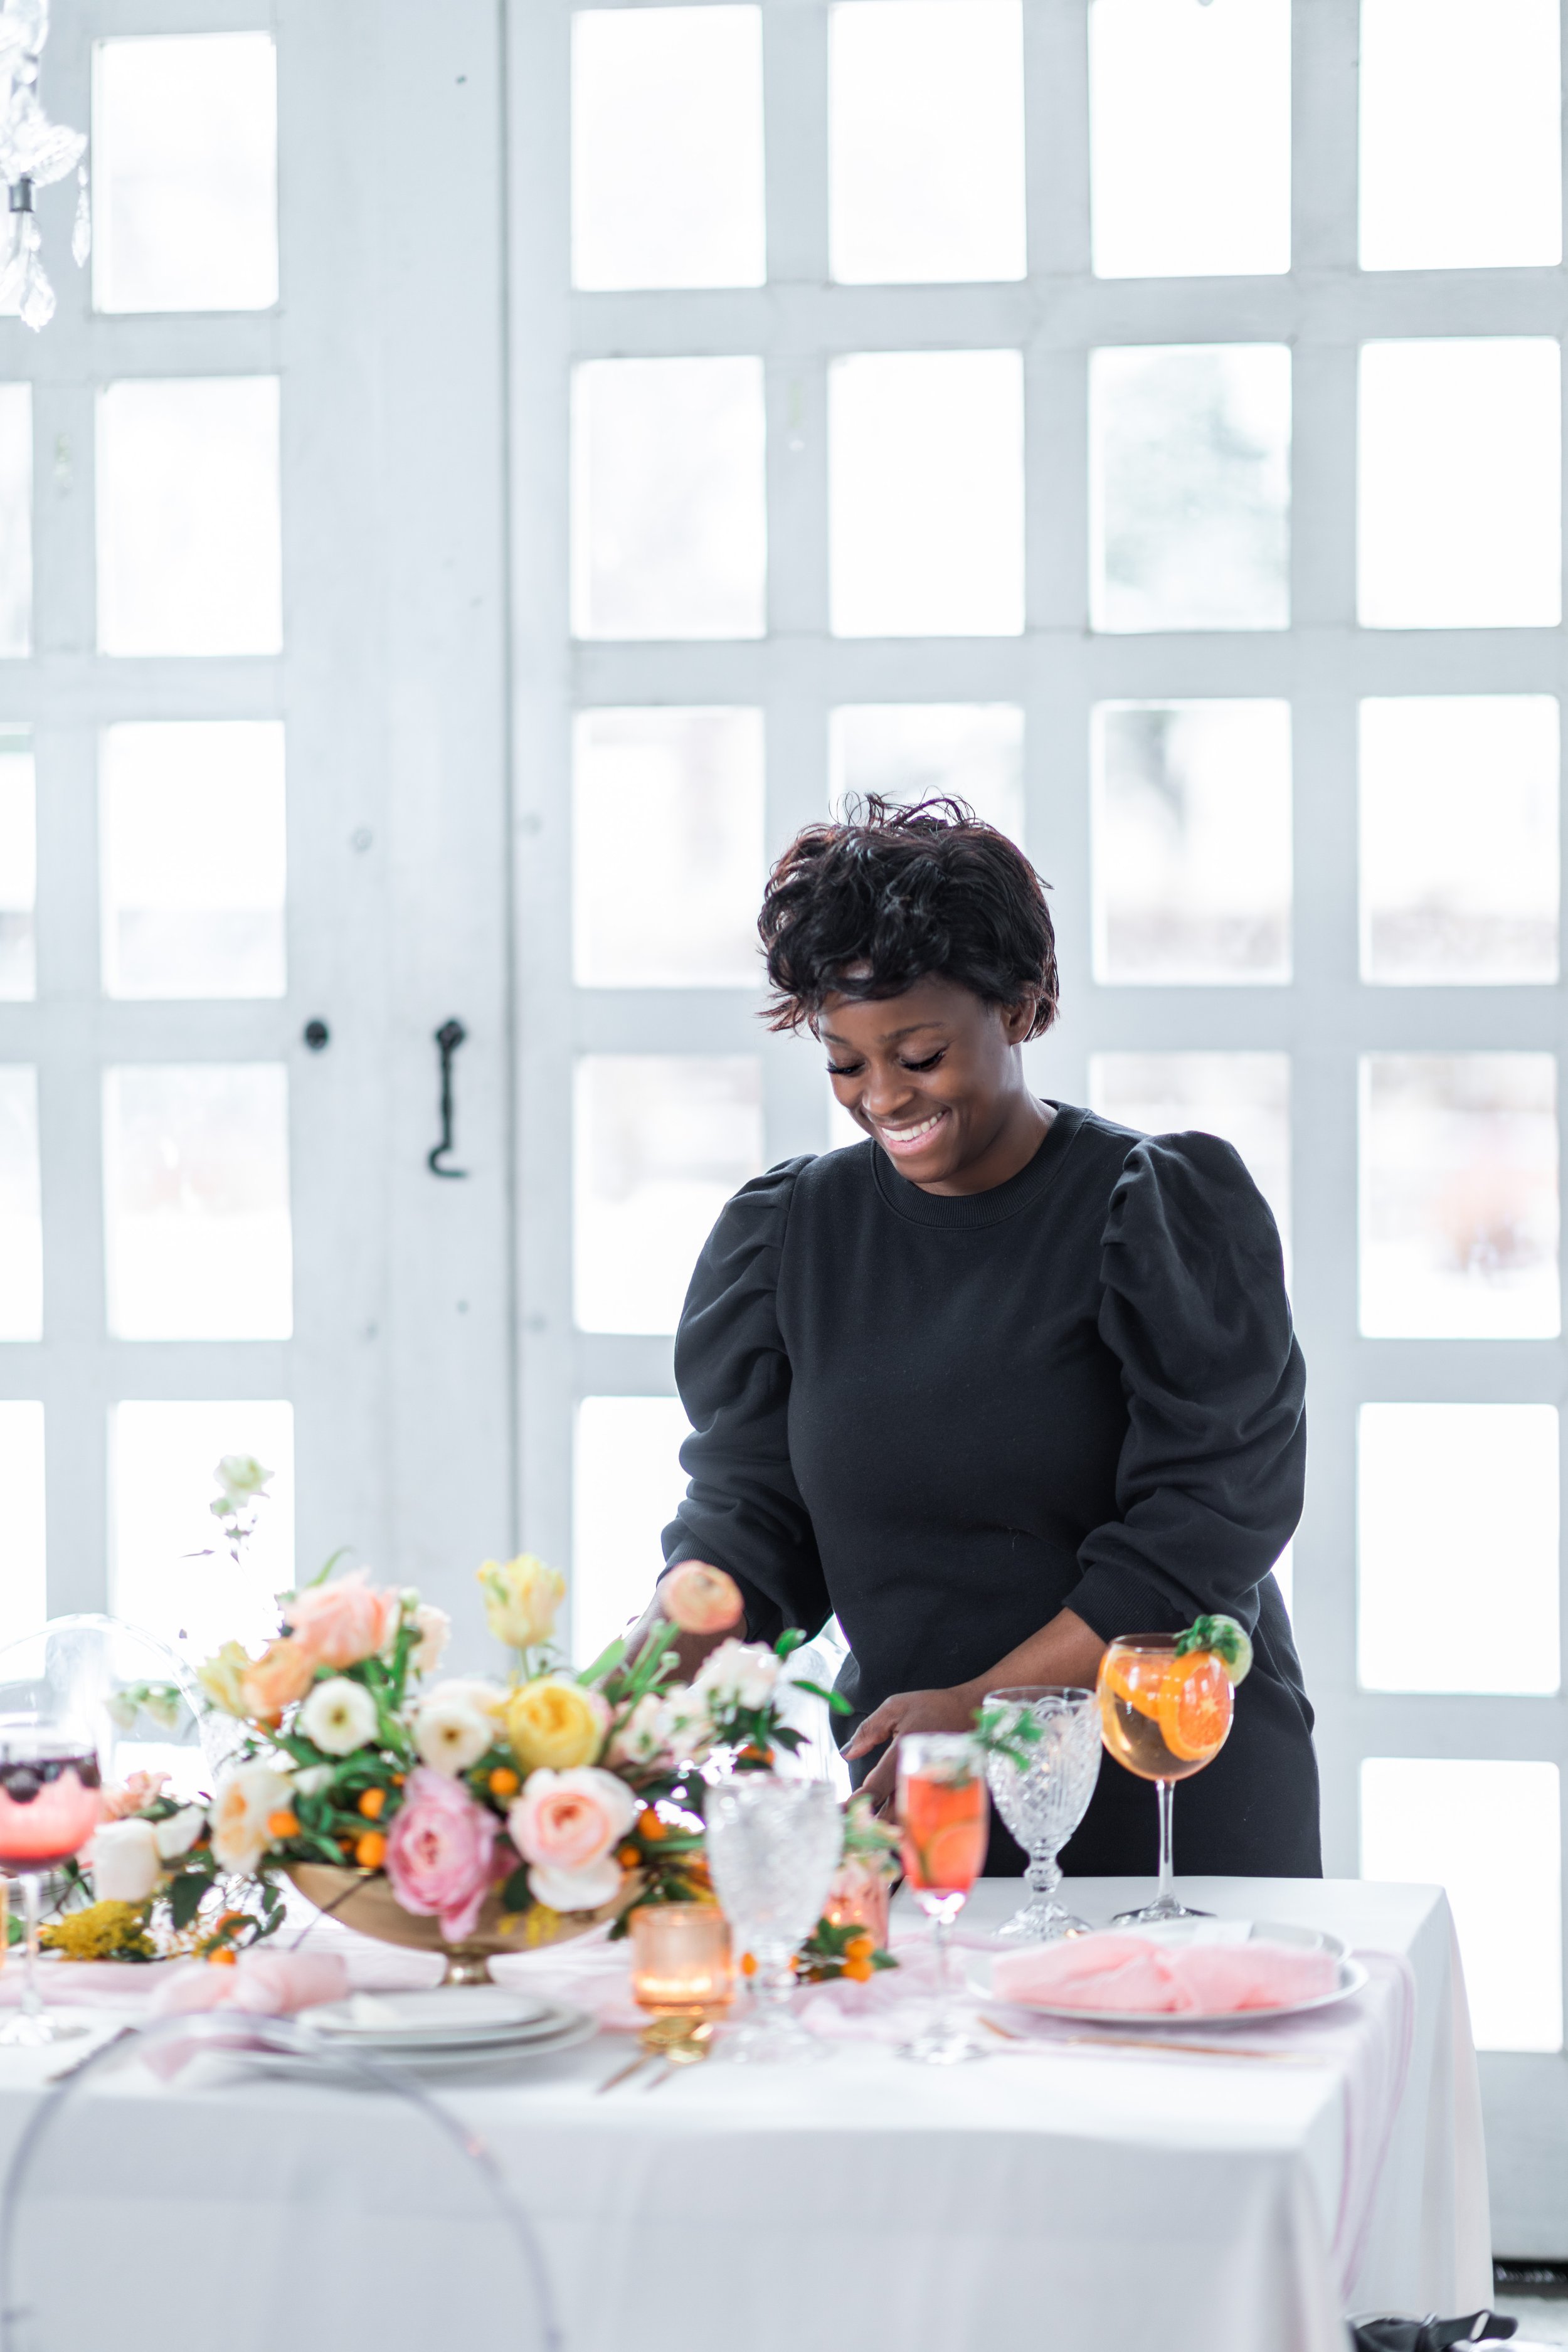  Savanna Richardson Photography explains why a wedding planner is different than a venue coordinator. why to hire a wedding planner #savannarichardsonphotography #weddingplannervsvenuecooridnator #weddingphotographer #weddingphotographersUtah 